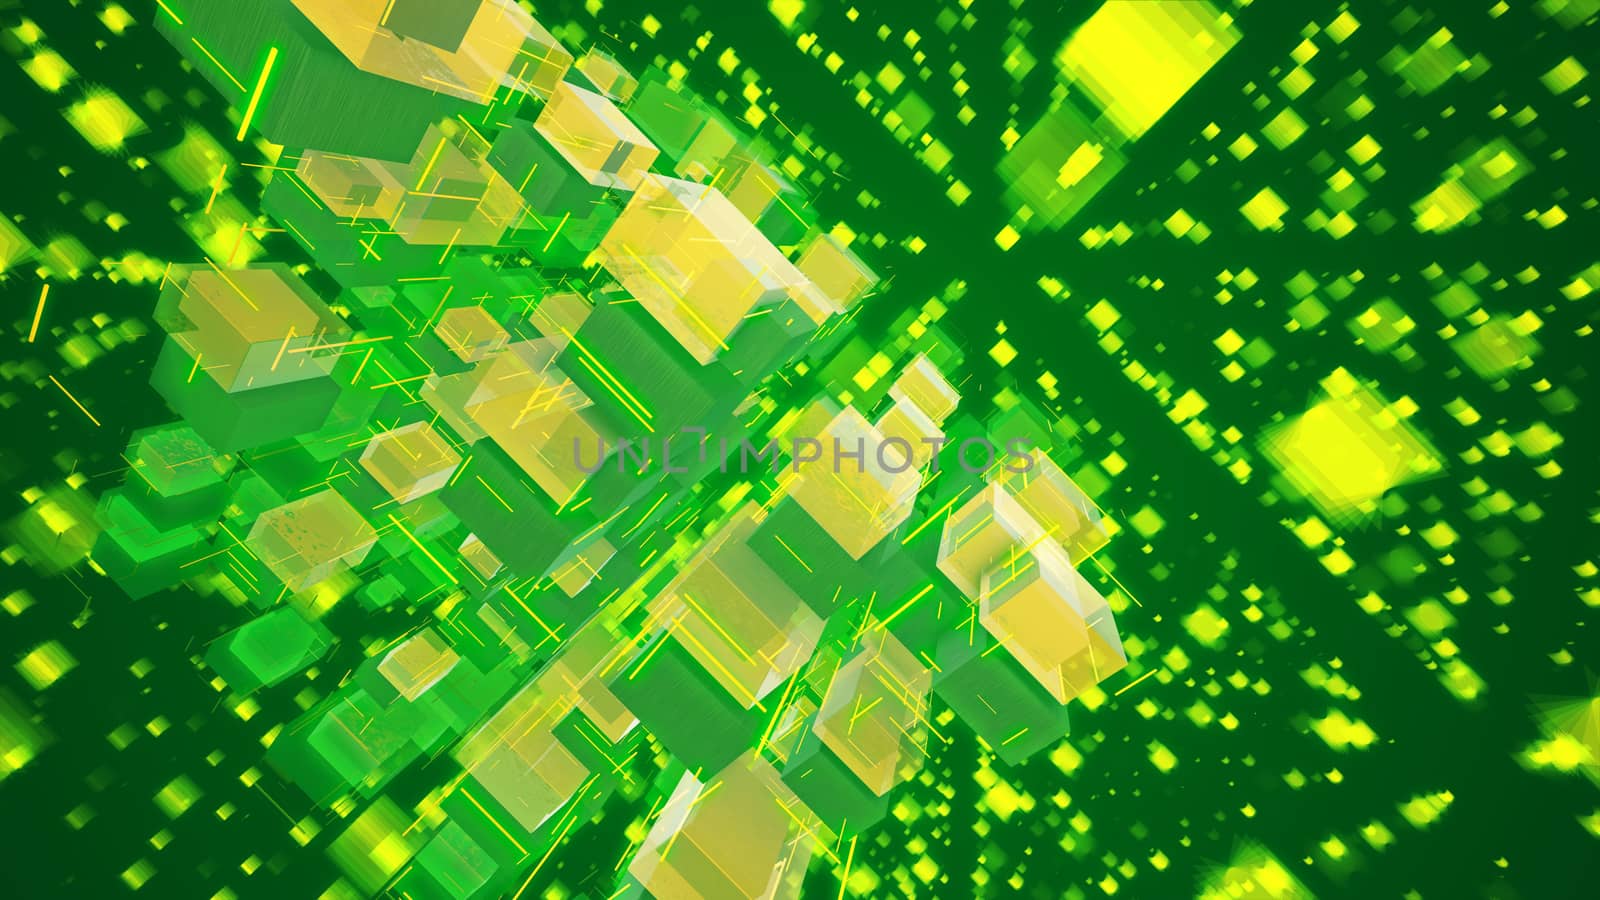 Artistic 3d illustration of shimmering yellow cubes fixed together as a macrostructure in the light green background with flying squares. They create the mood of innovation and luxury. 